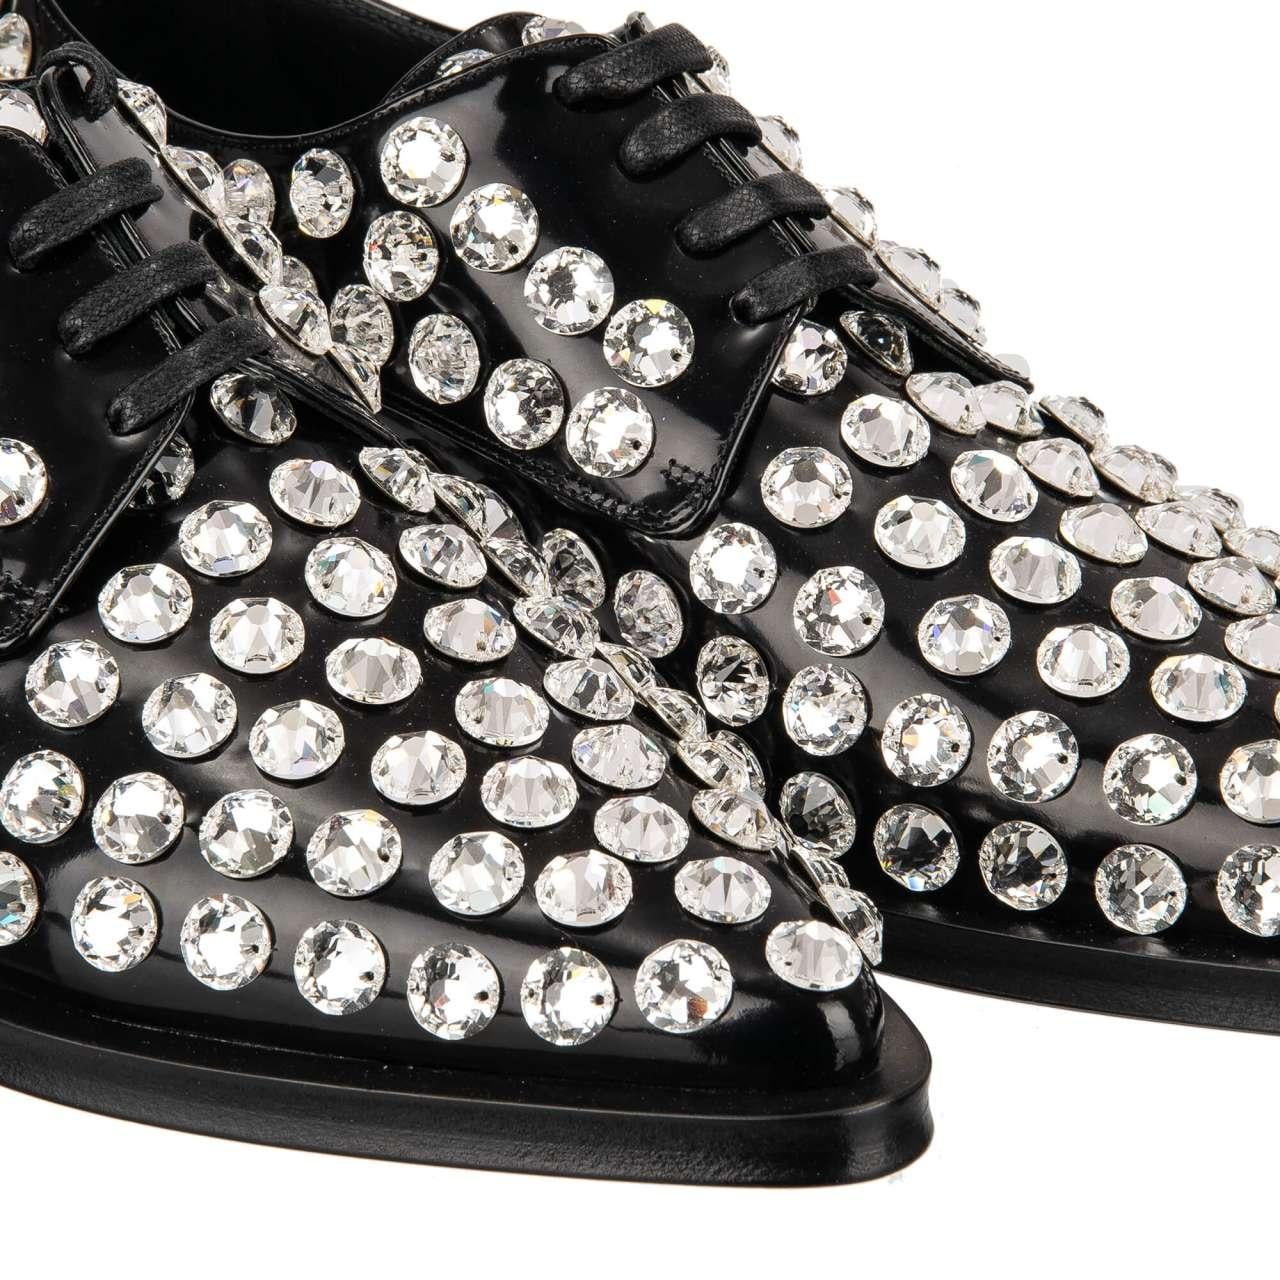 Dolce & Gabbana - Crystal Classic Leather Shoes MILLENIALS Black 39 US 9 For Sale 1